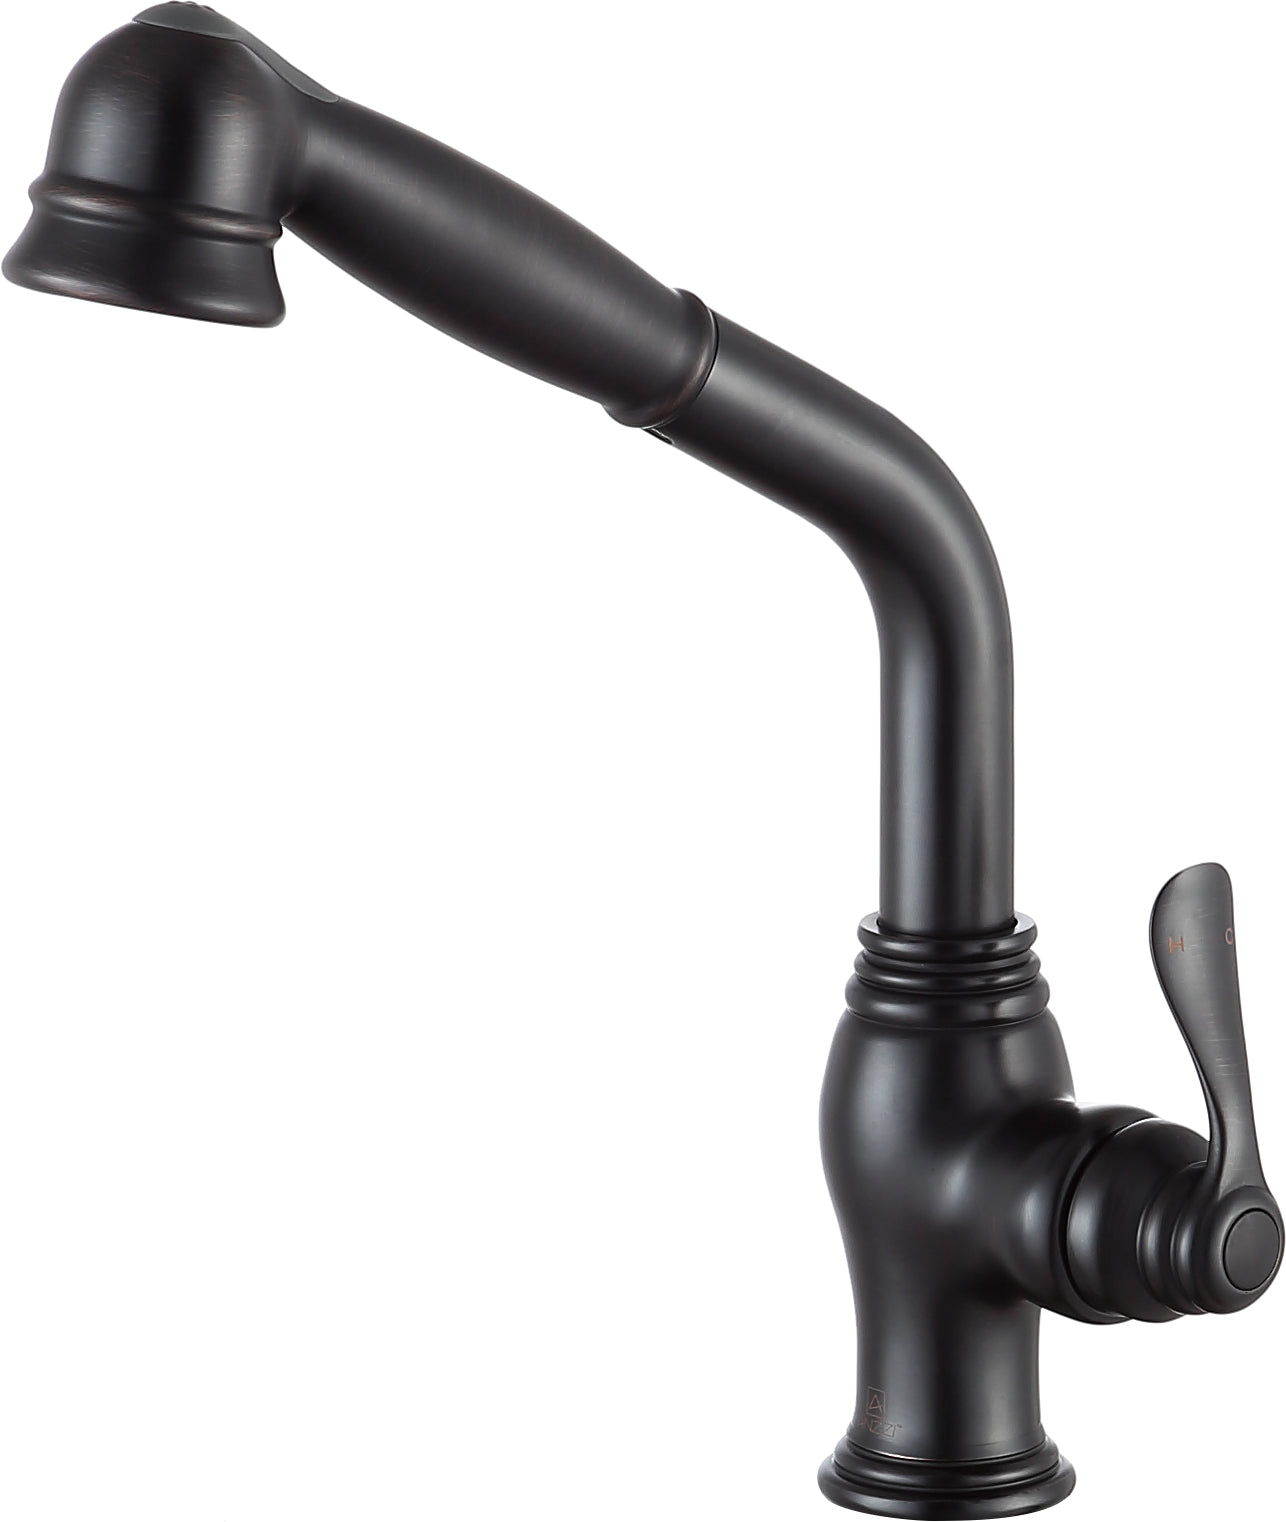 KF-AZ203ORB - Del Moro Single-Handle Pull-Out Sprayer Kitchen Faucet in Oil Rubbed Bronze